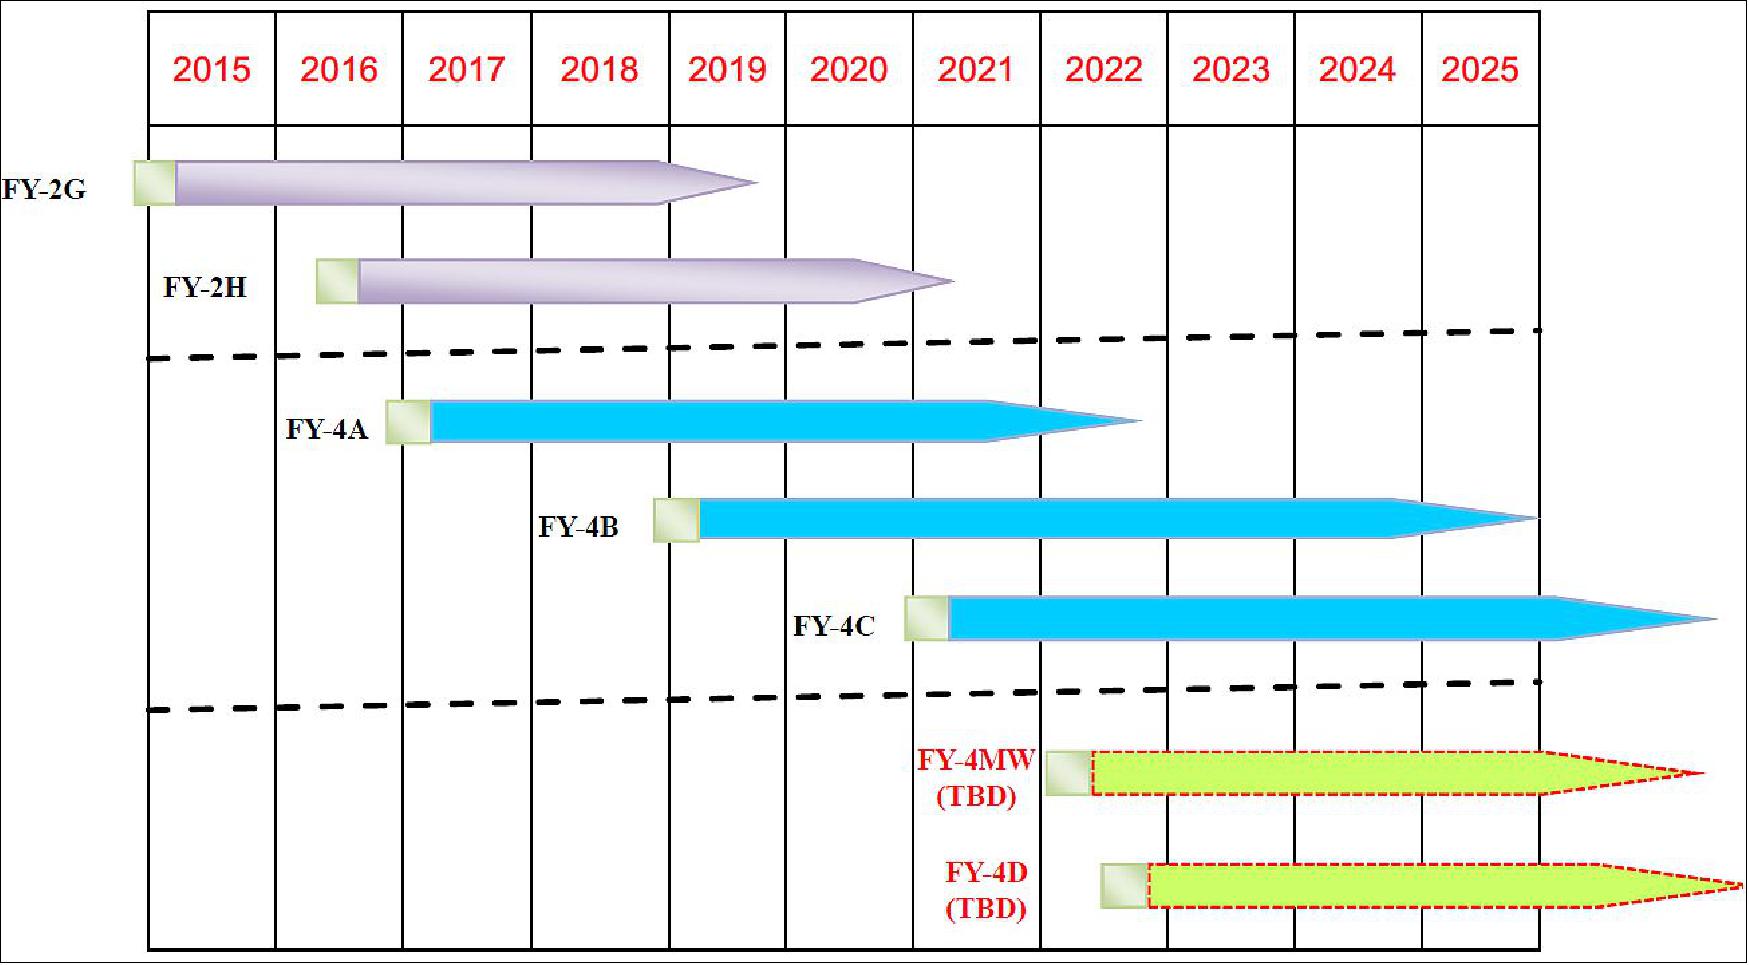 Figure 1: Overview of the GEO meteorological launch program of CMA for the next decade (image credit: CMA)